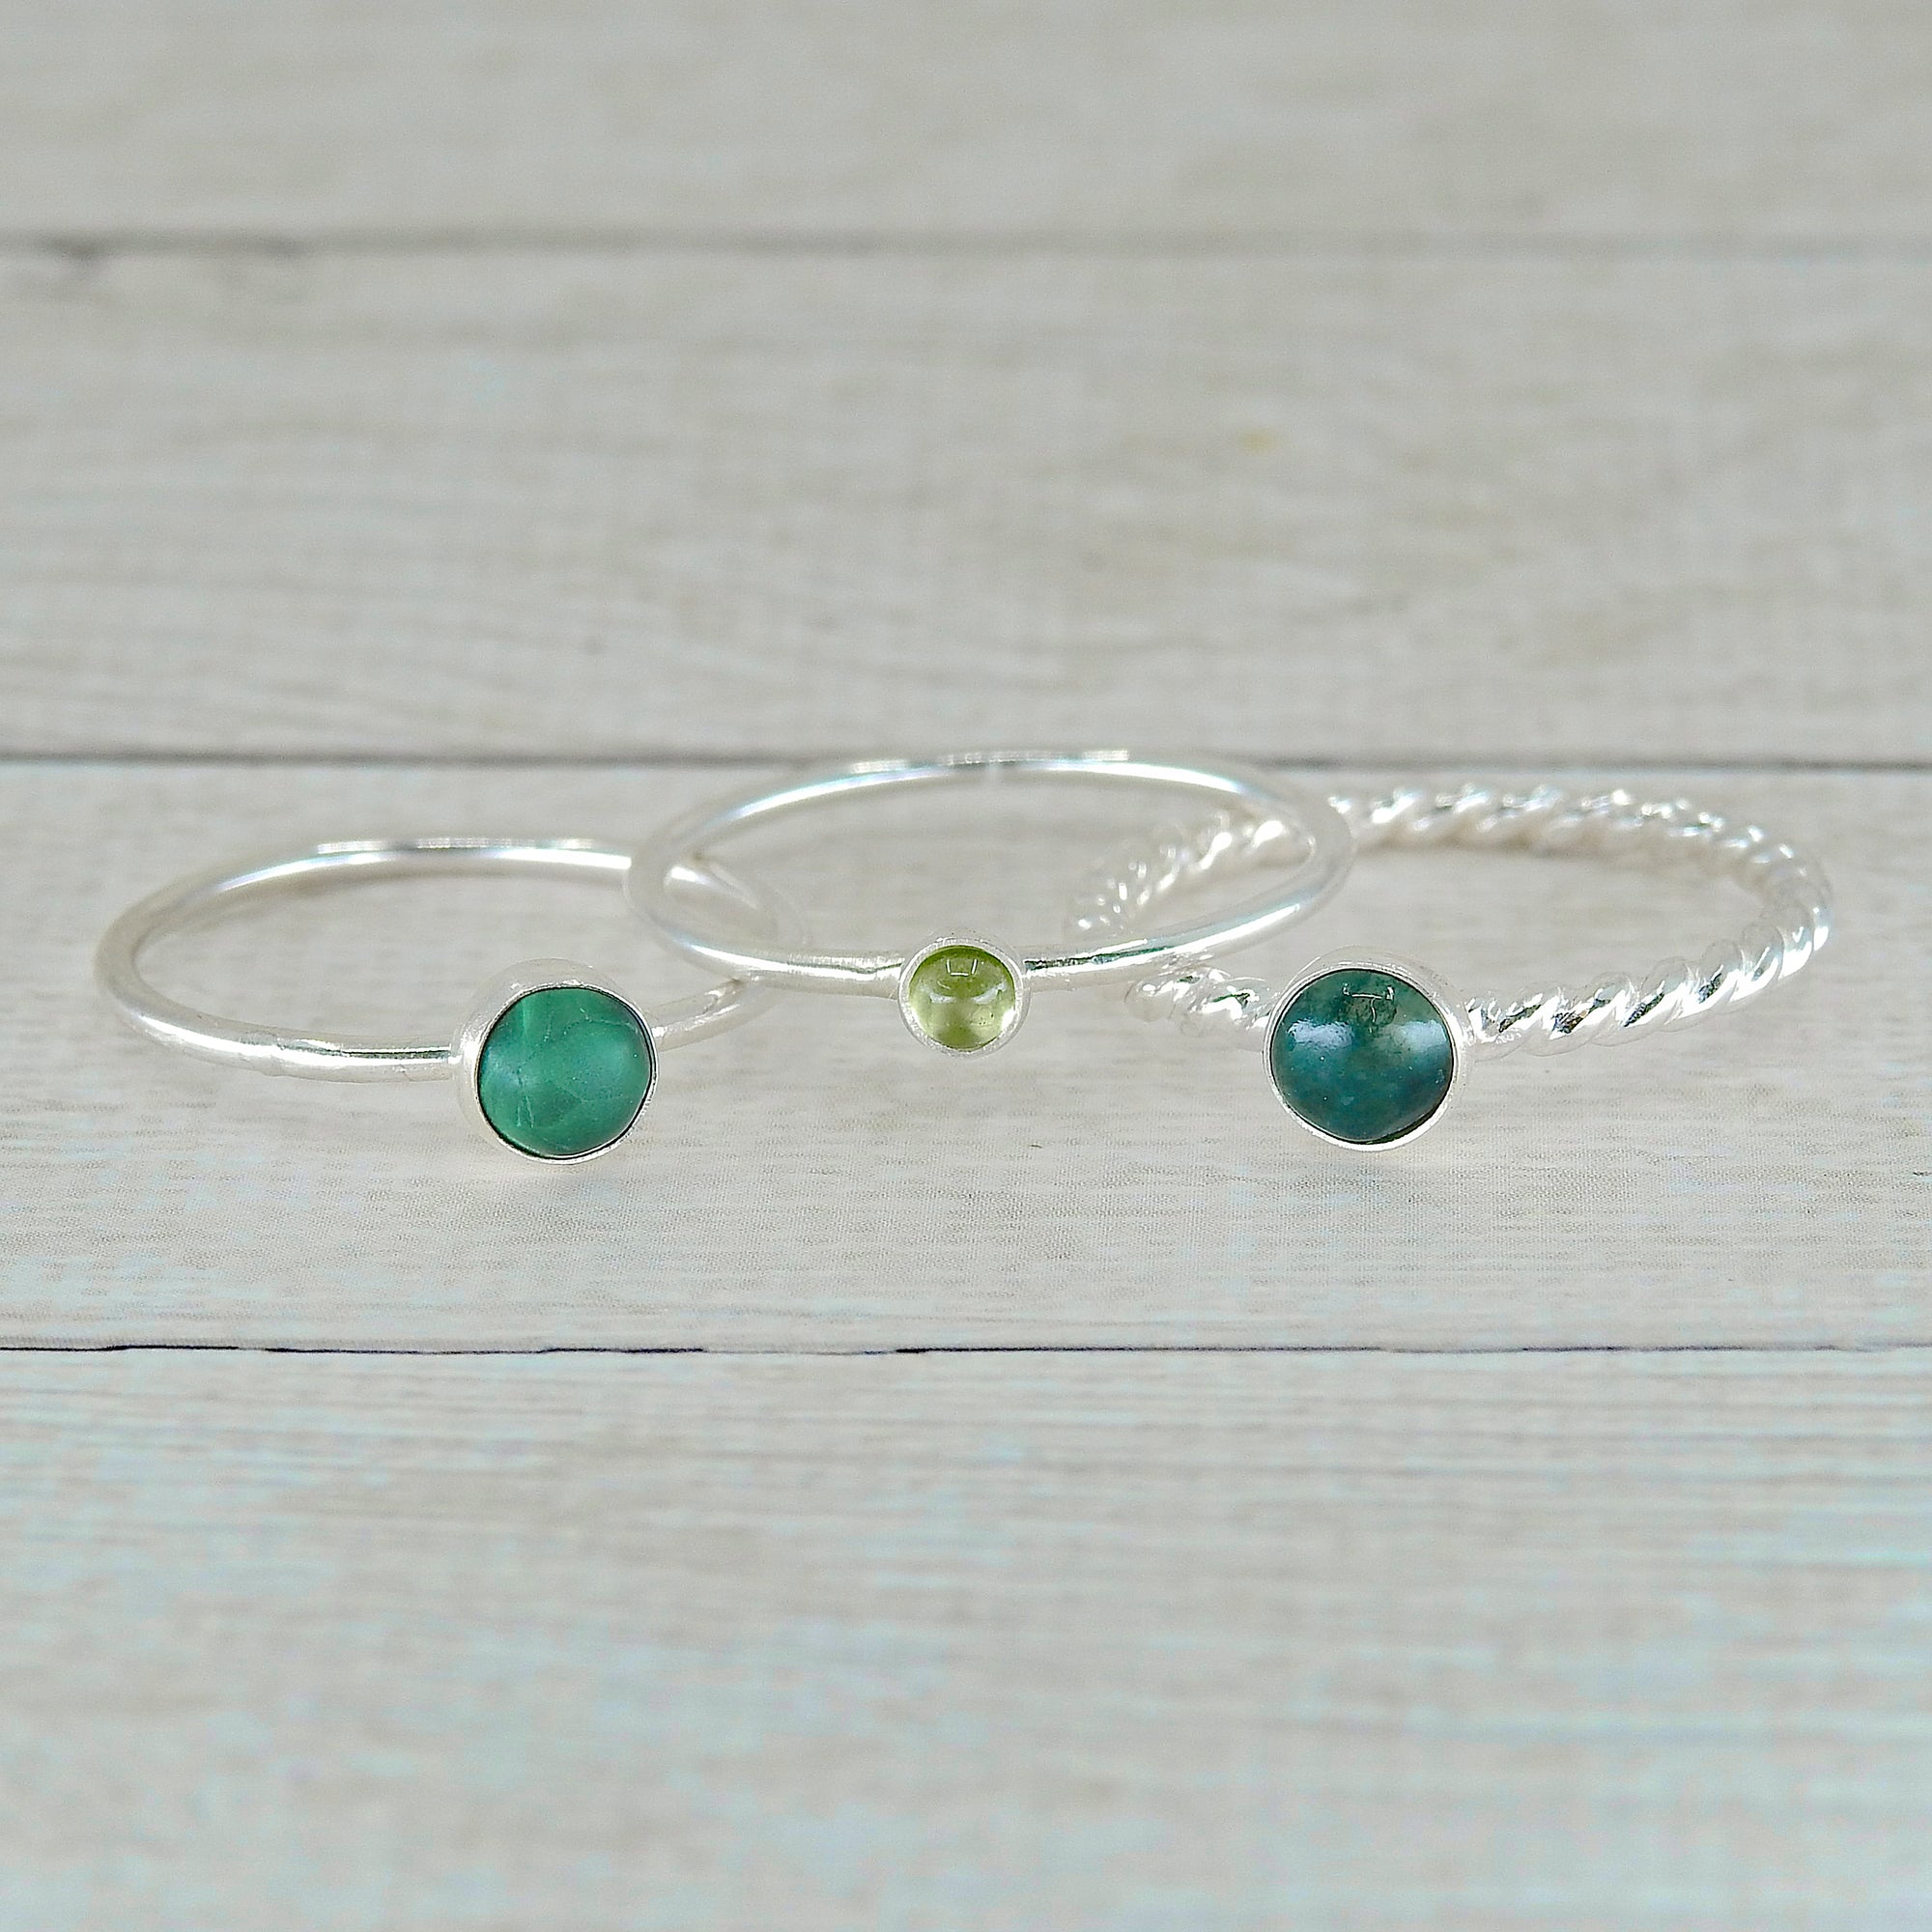 The Artemis Ring Stack of Fortune - Peridot, Moss Agate & Malachite - Made to Order